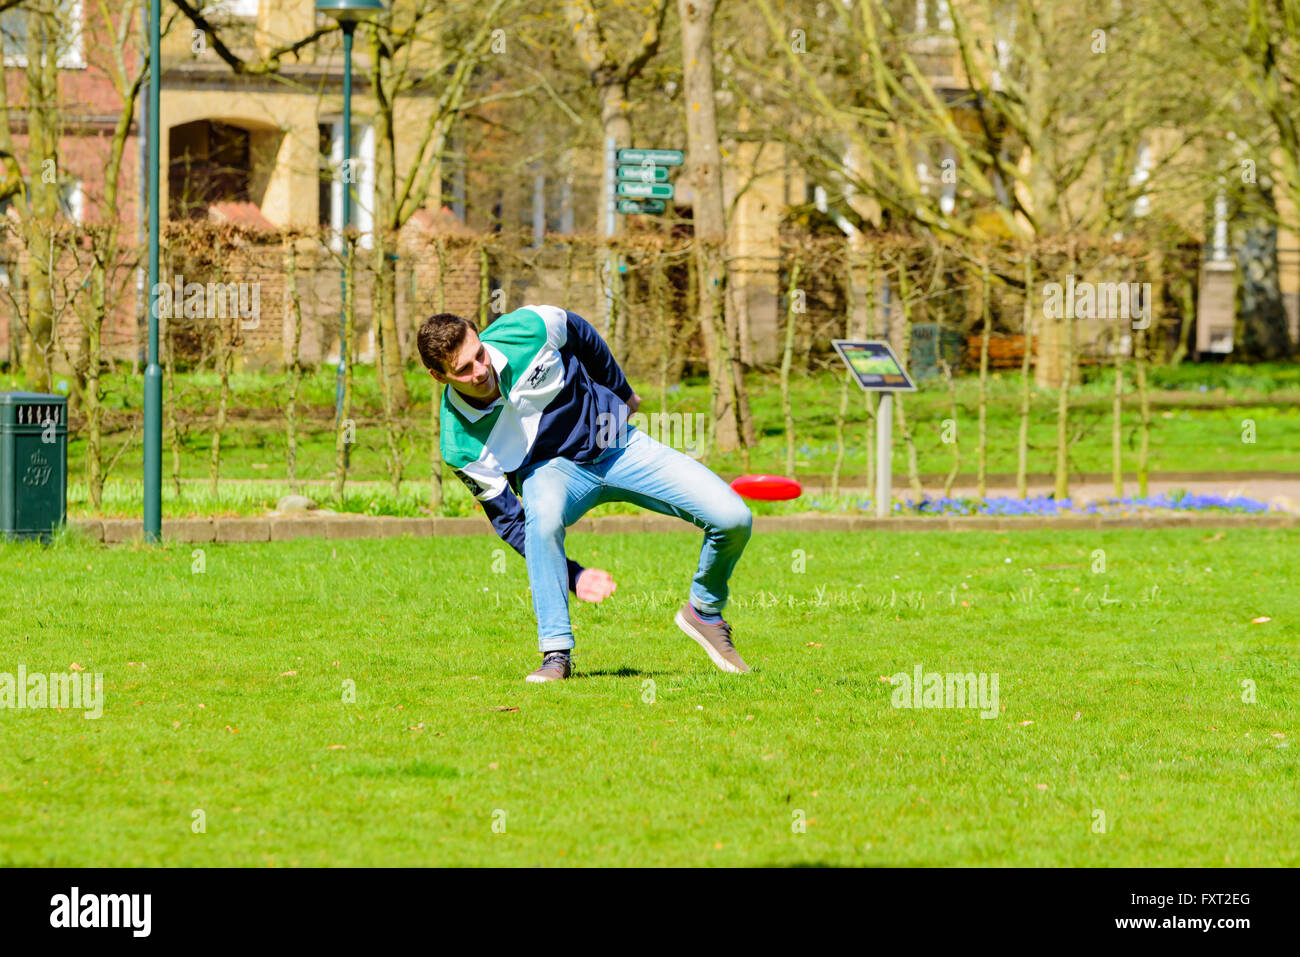 Lund, Sweden - April 11, 2016: Everyday city life. Young adult man in a park is throwing a flying disc between his legs. Stock Photo